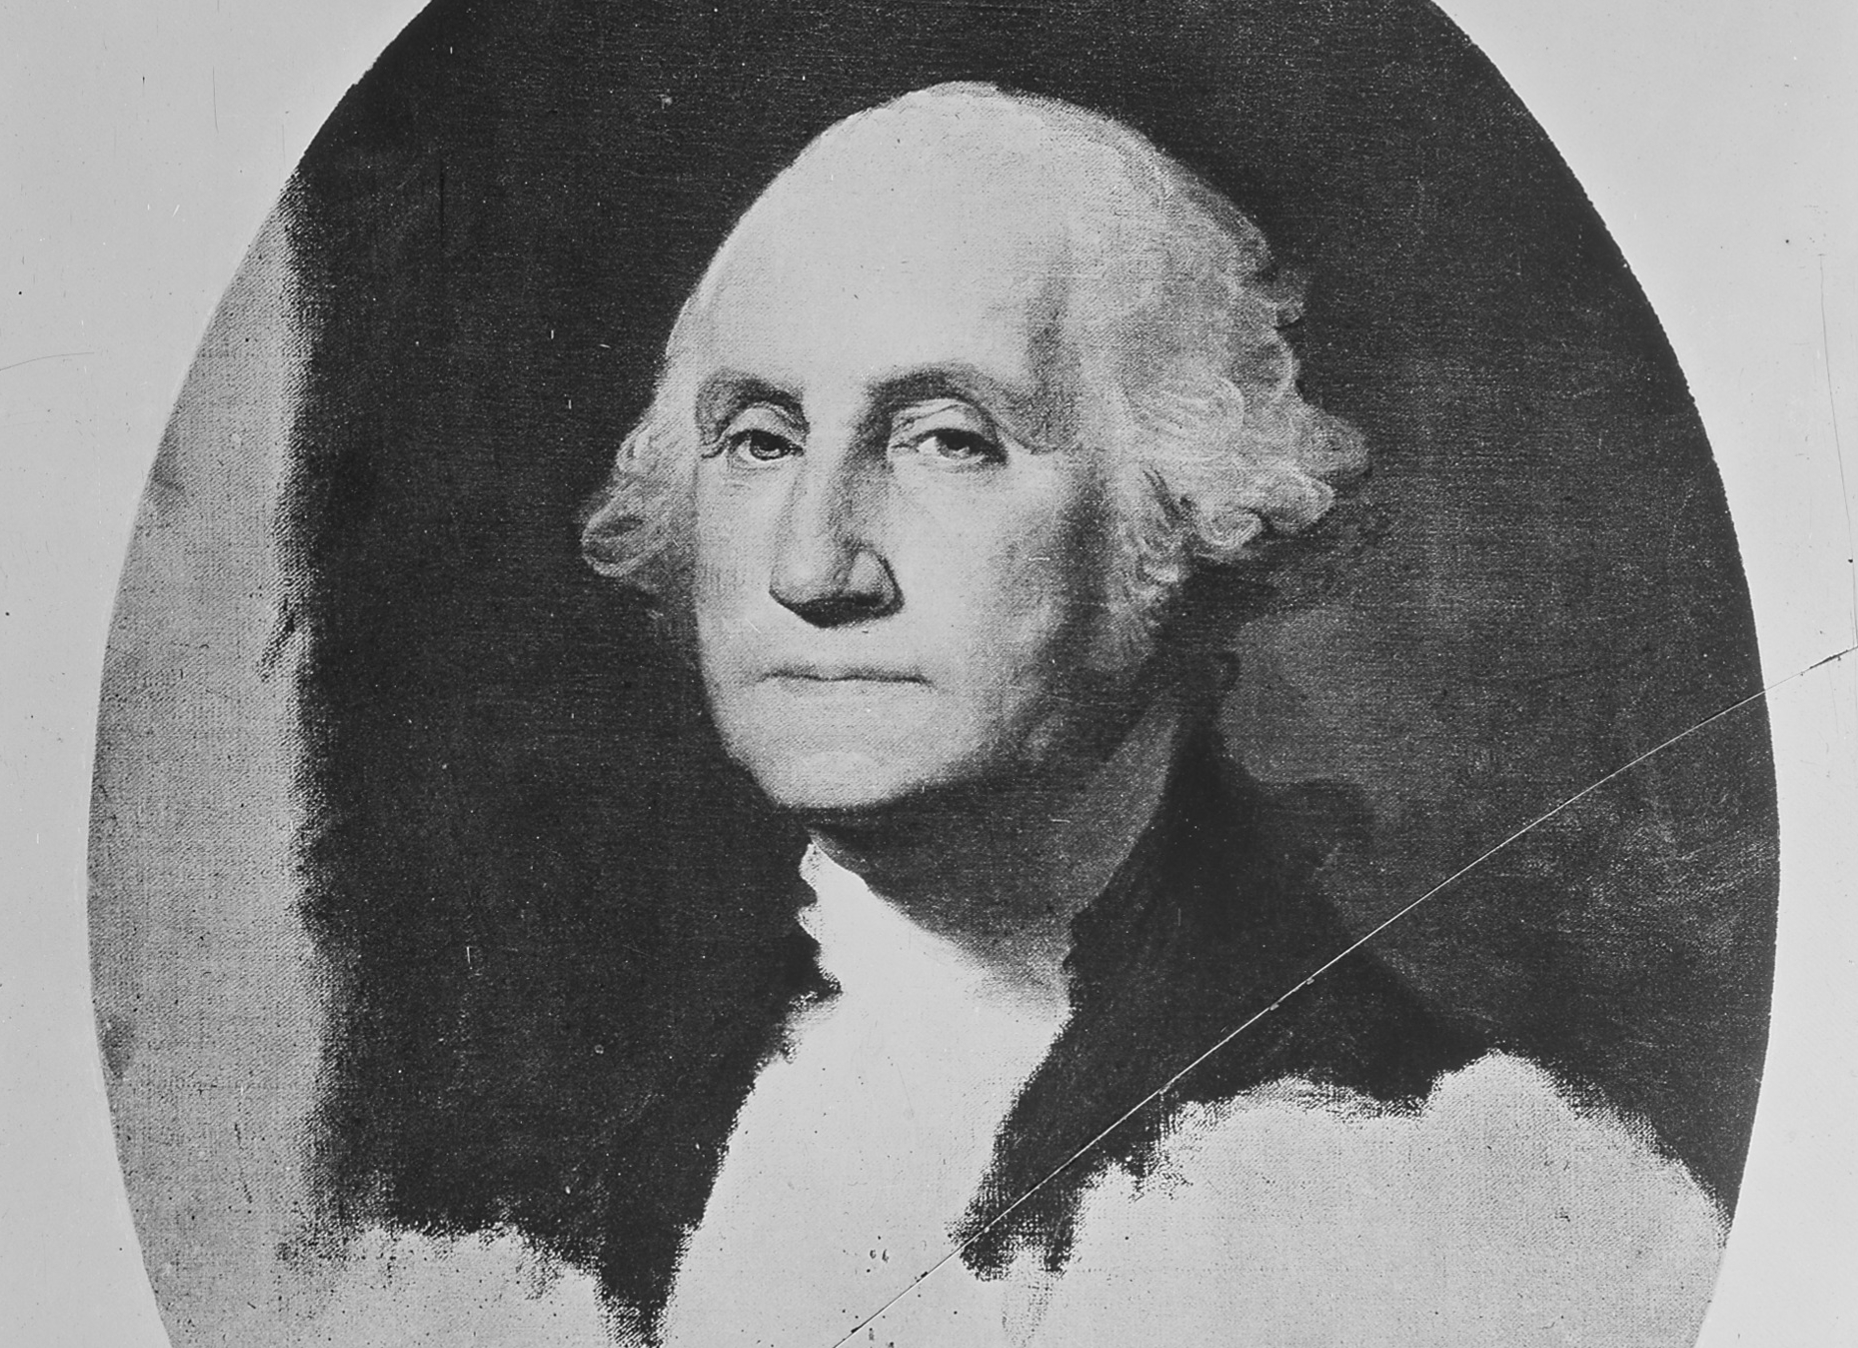 George Washington in oval portrait warned against foreign entanglements like american globalism